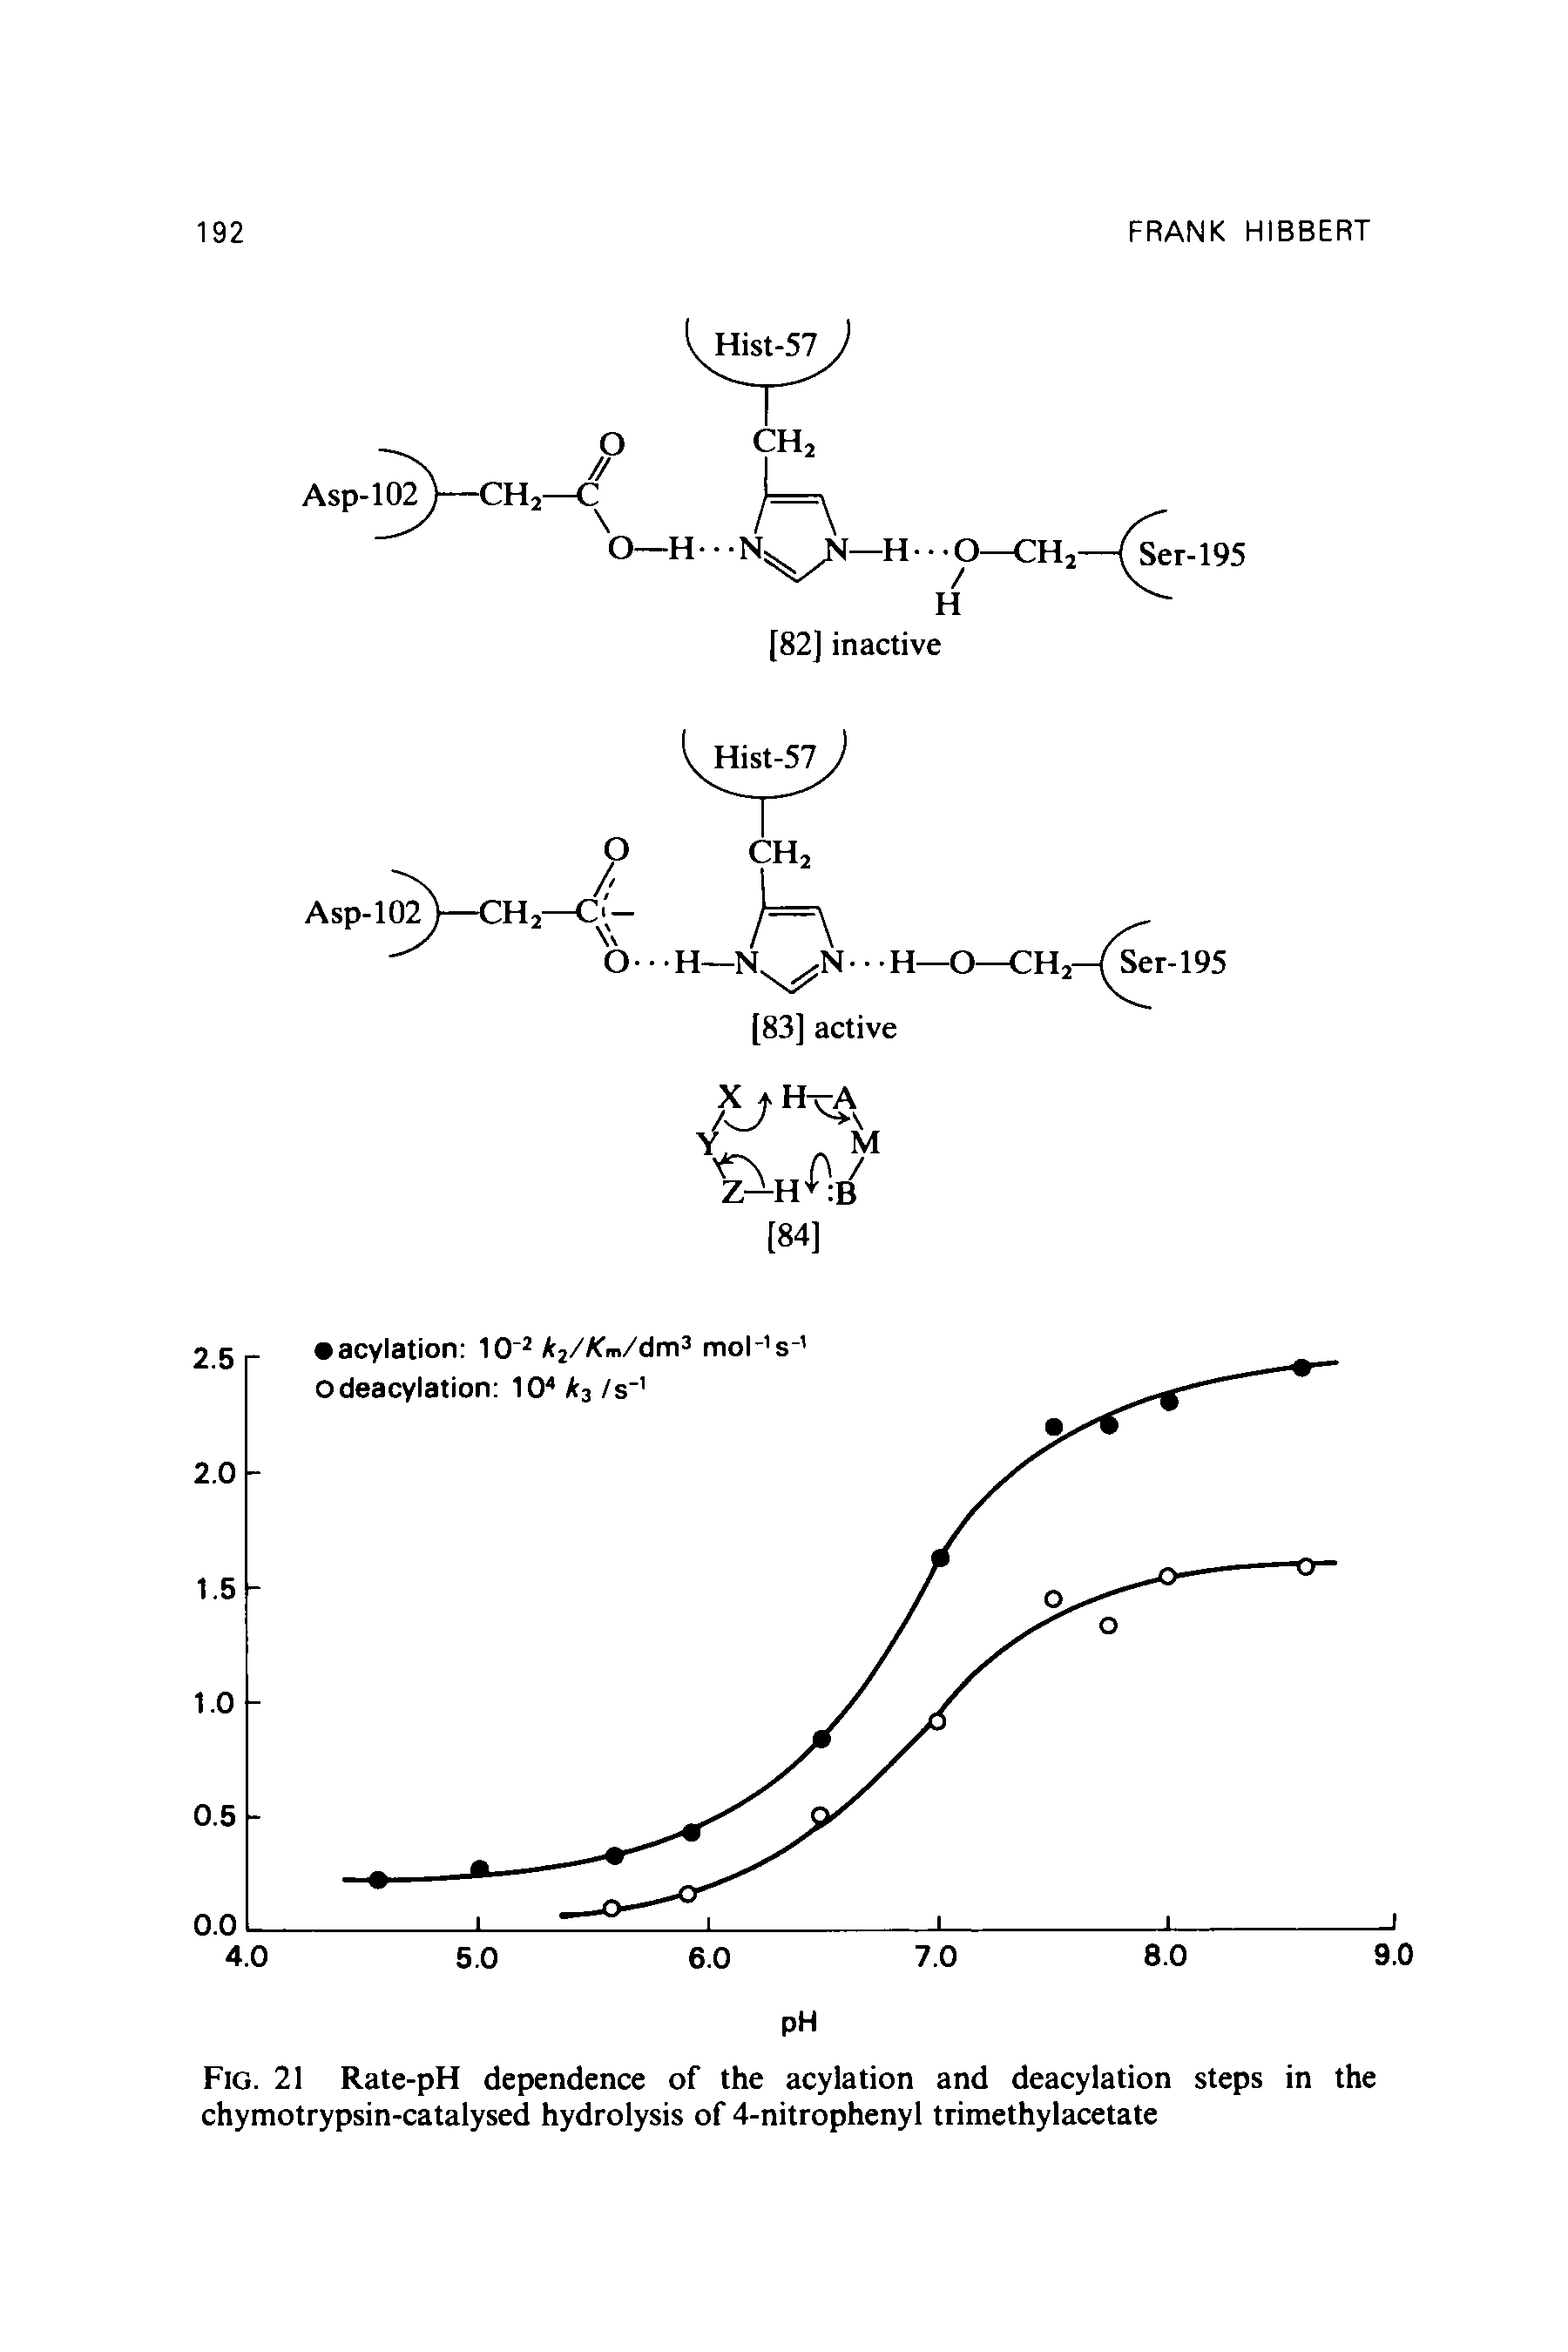 Fig. 21 Rate-pH dependence of the acylation and deacylation steps in the chymotrypsin-catalysed hydrolysis of 4-nitrophenyl trimethylacetate...